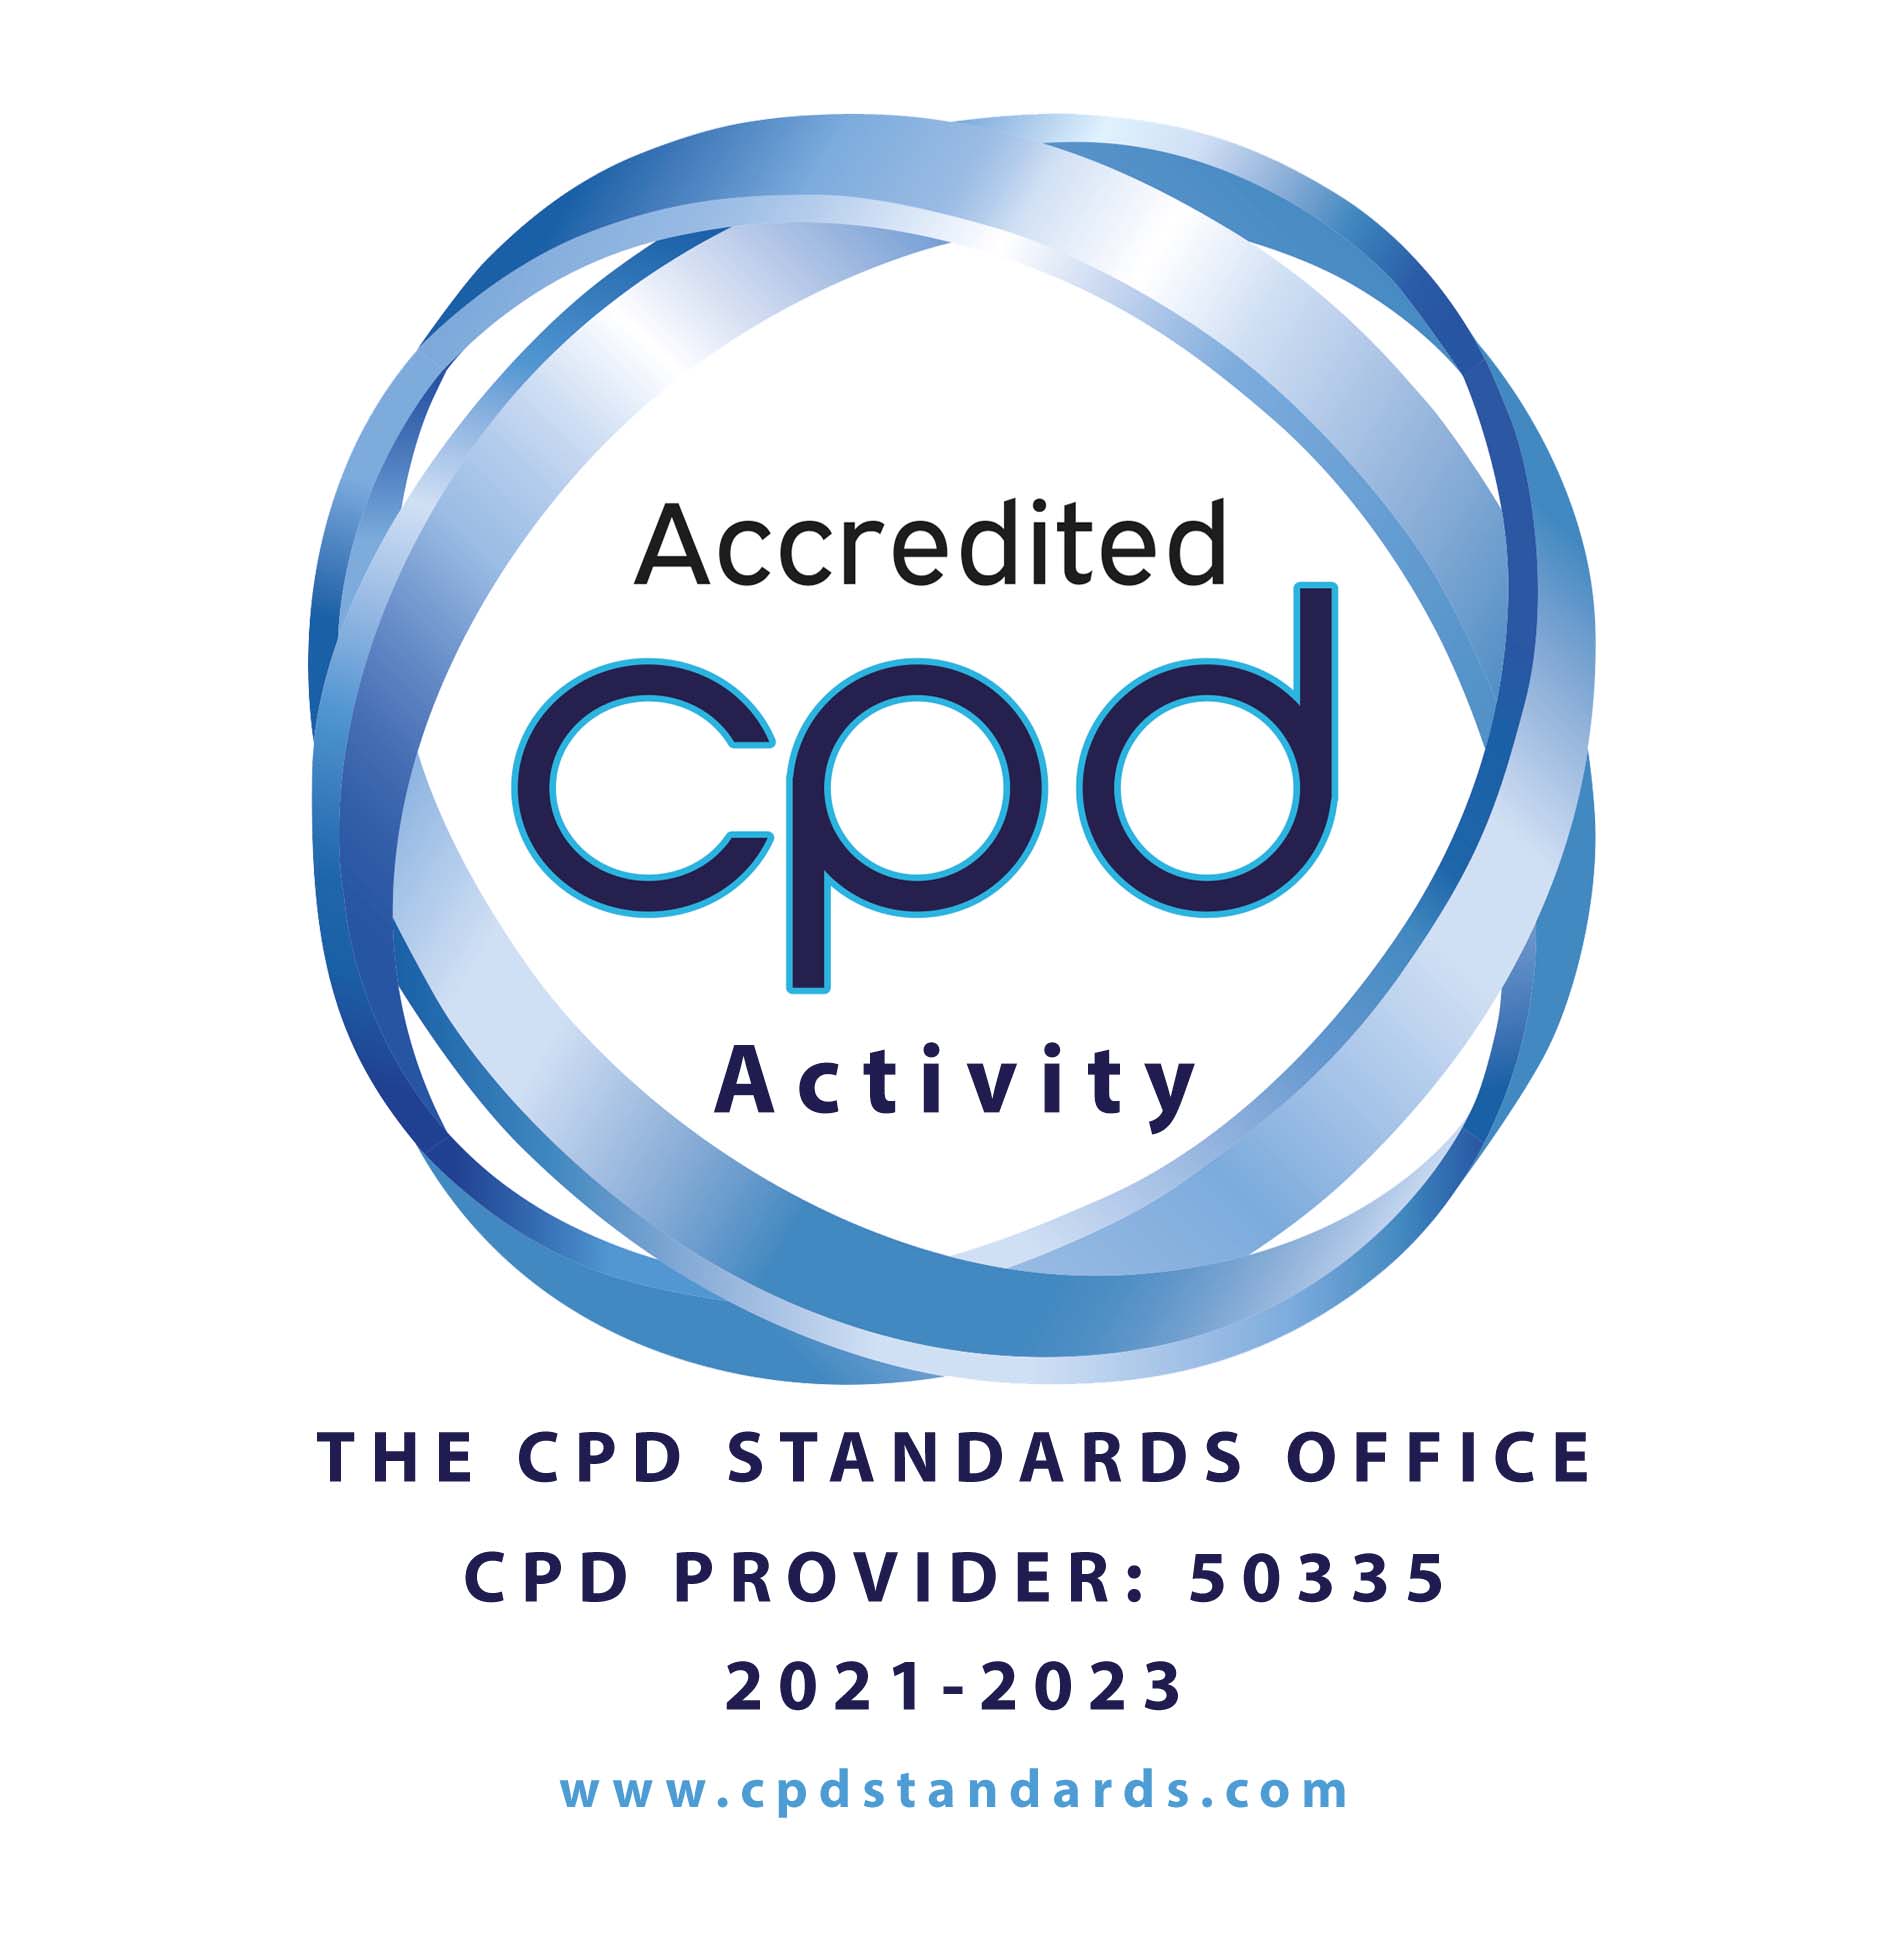 Accredited CPD Activity